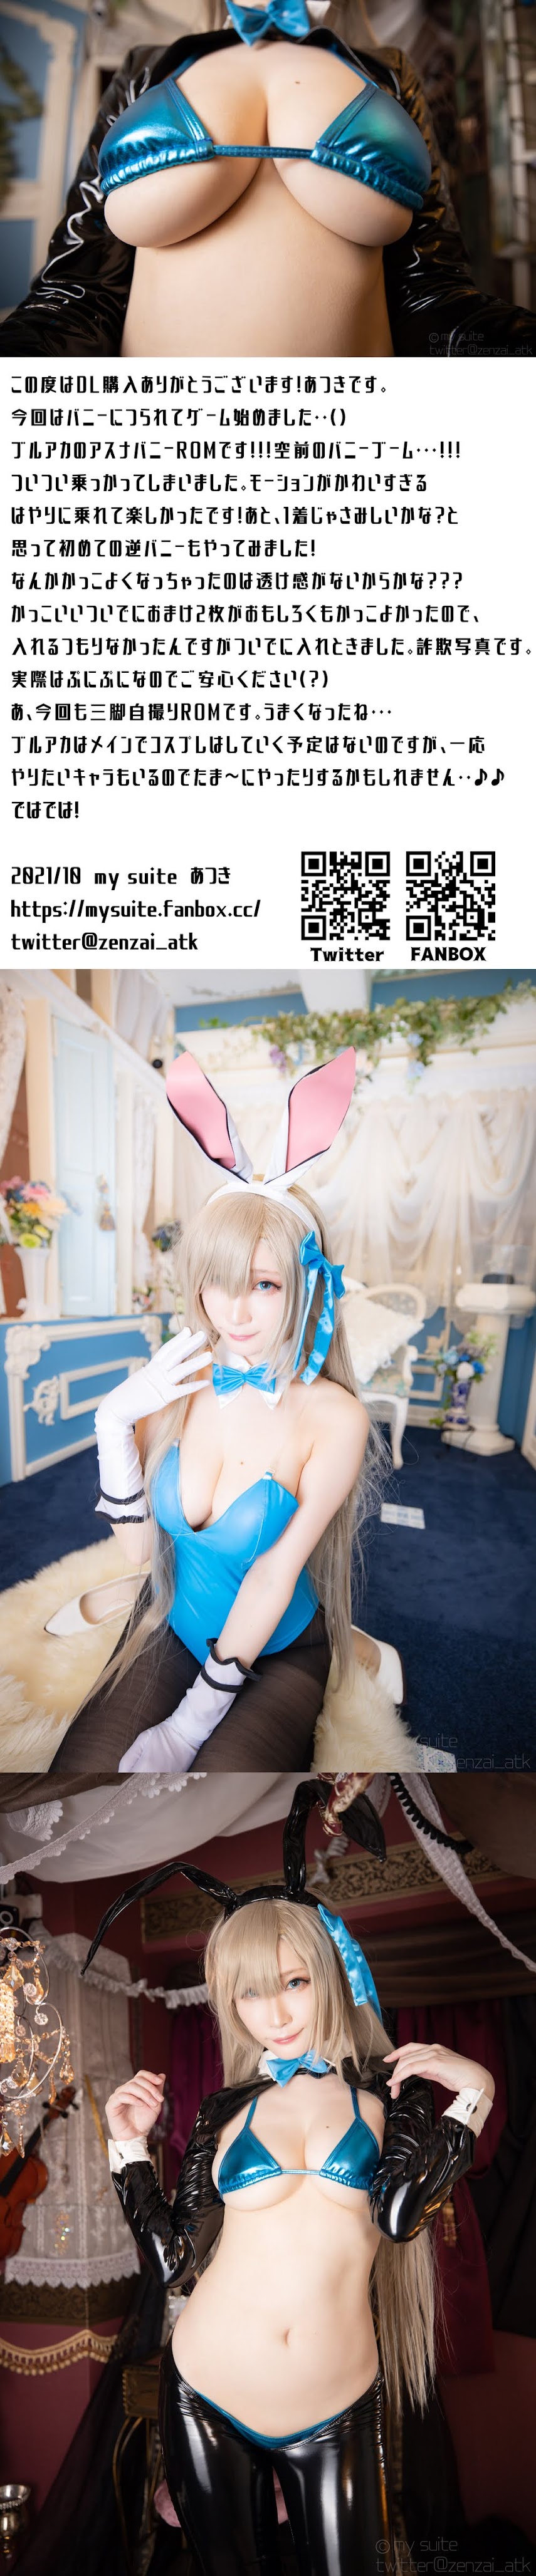 [Cosplay] [my suite] Atsuki あつき - Bunny Surprise (Blue Archive) [190P268MB]   P214571 - idols